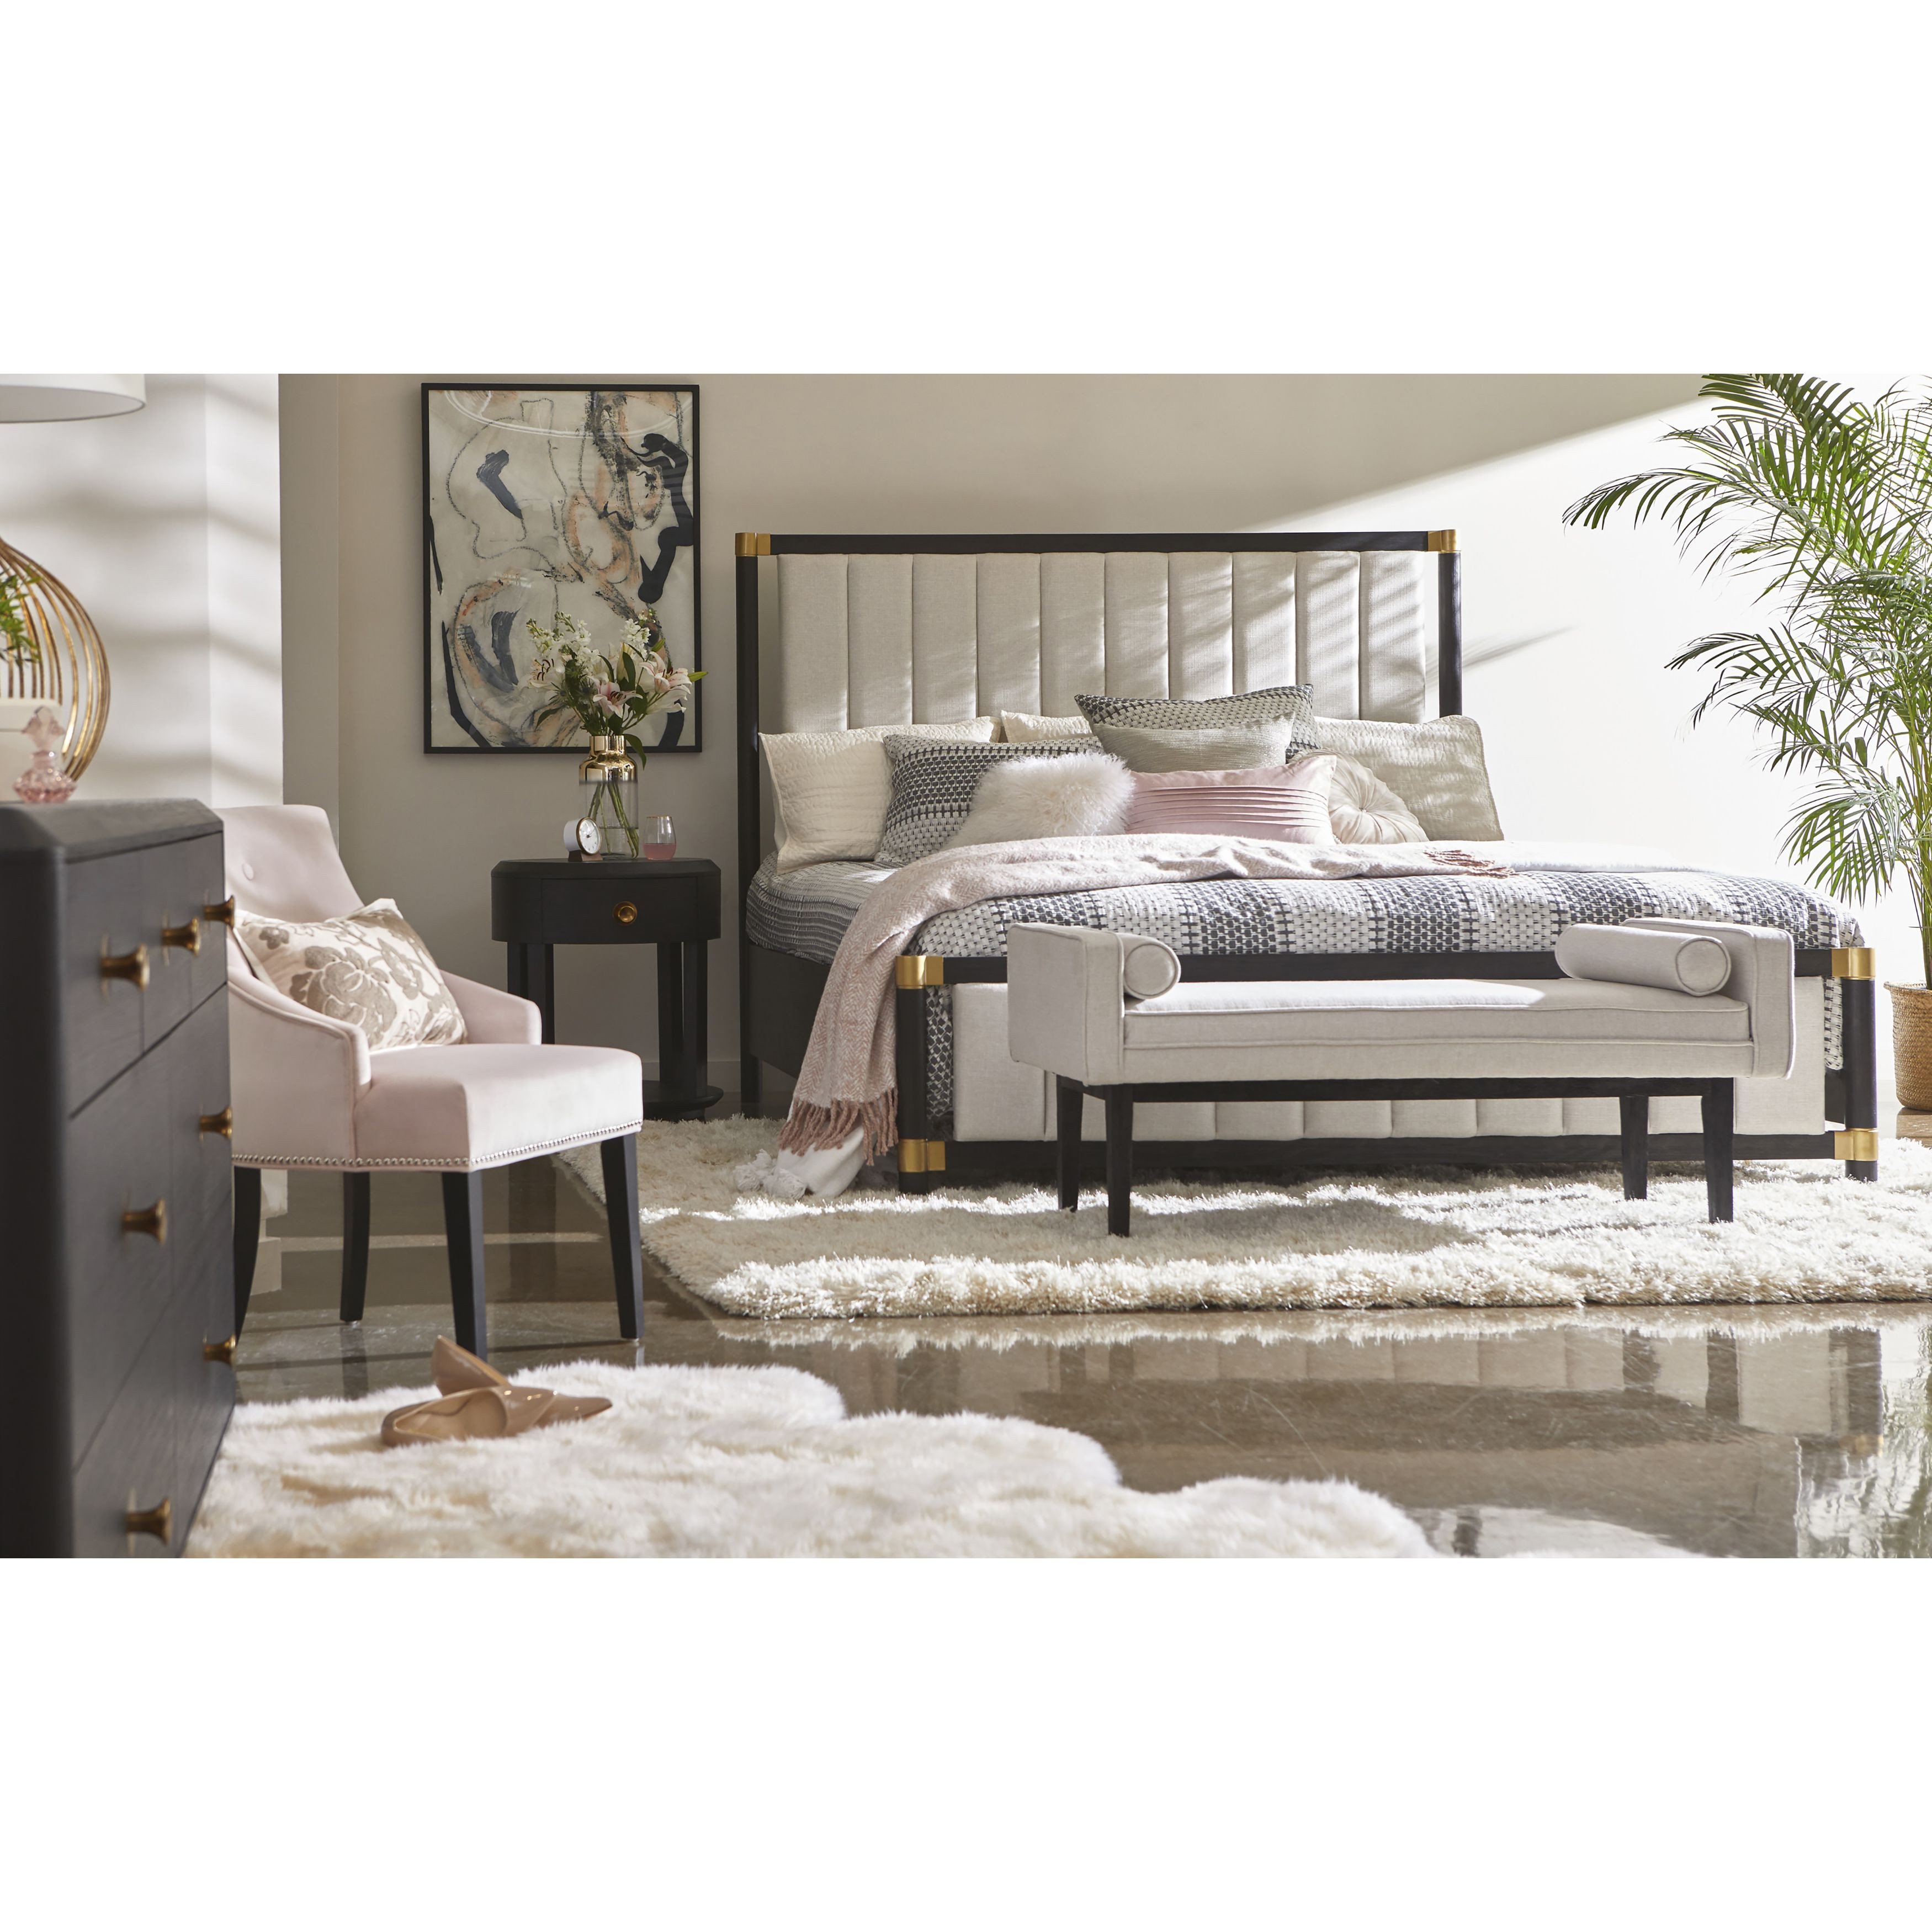 Walmart Bedroom Set Queen Unique Upholstered End Of Bed Bench In Natural White Size 52 0